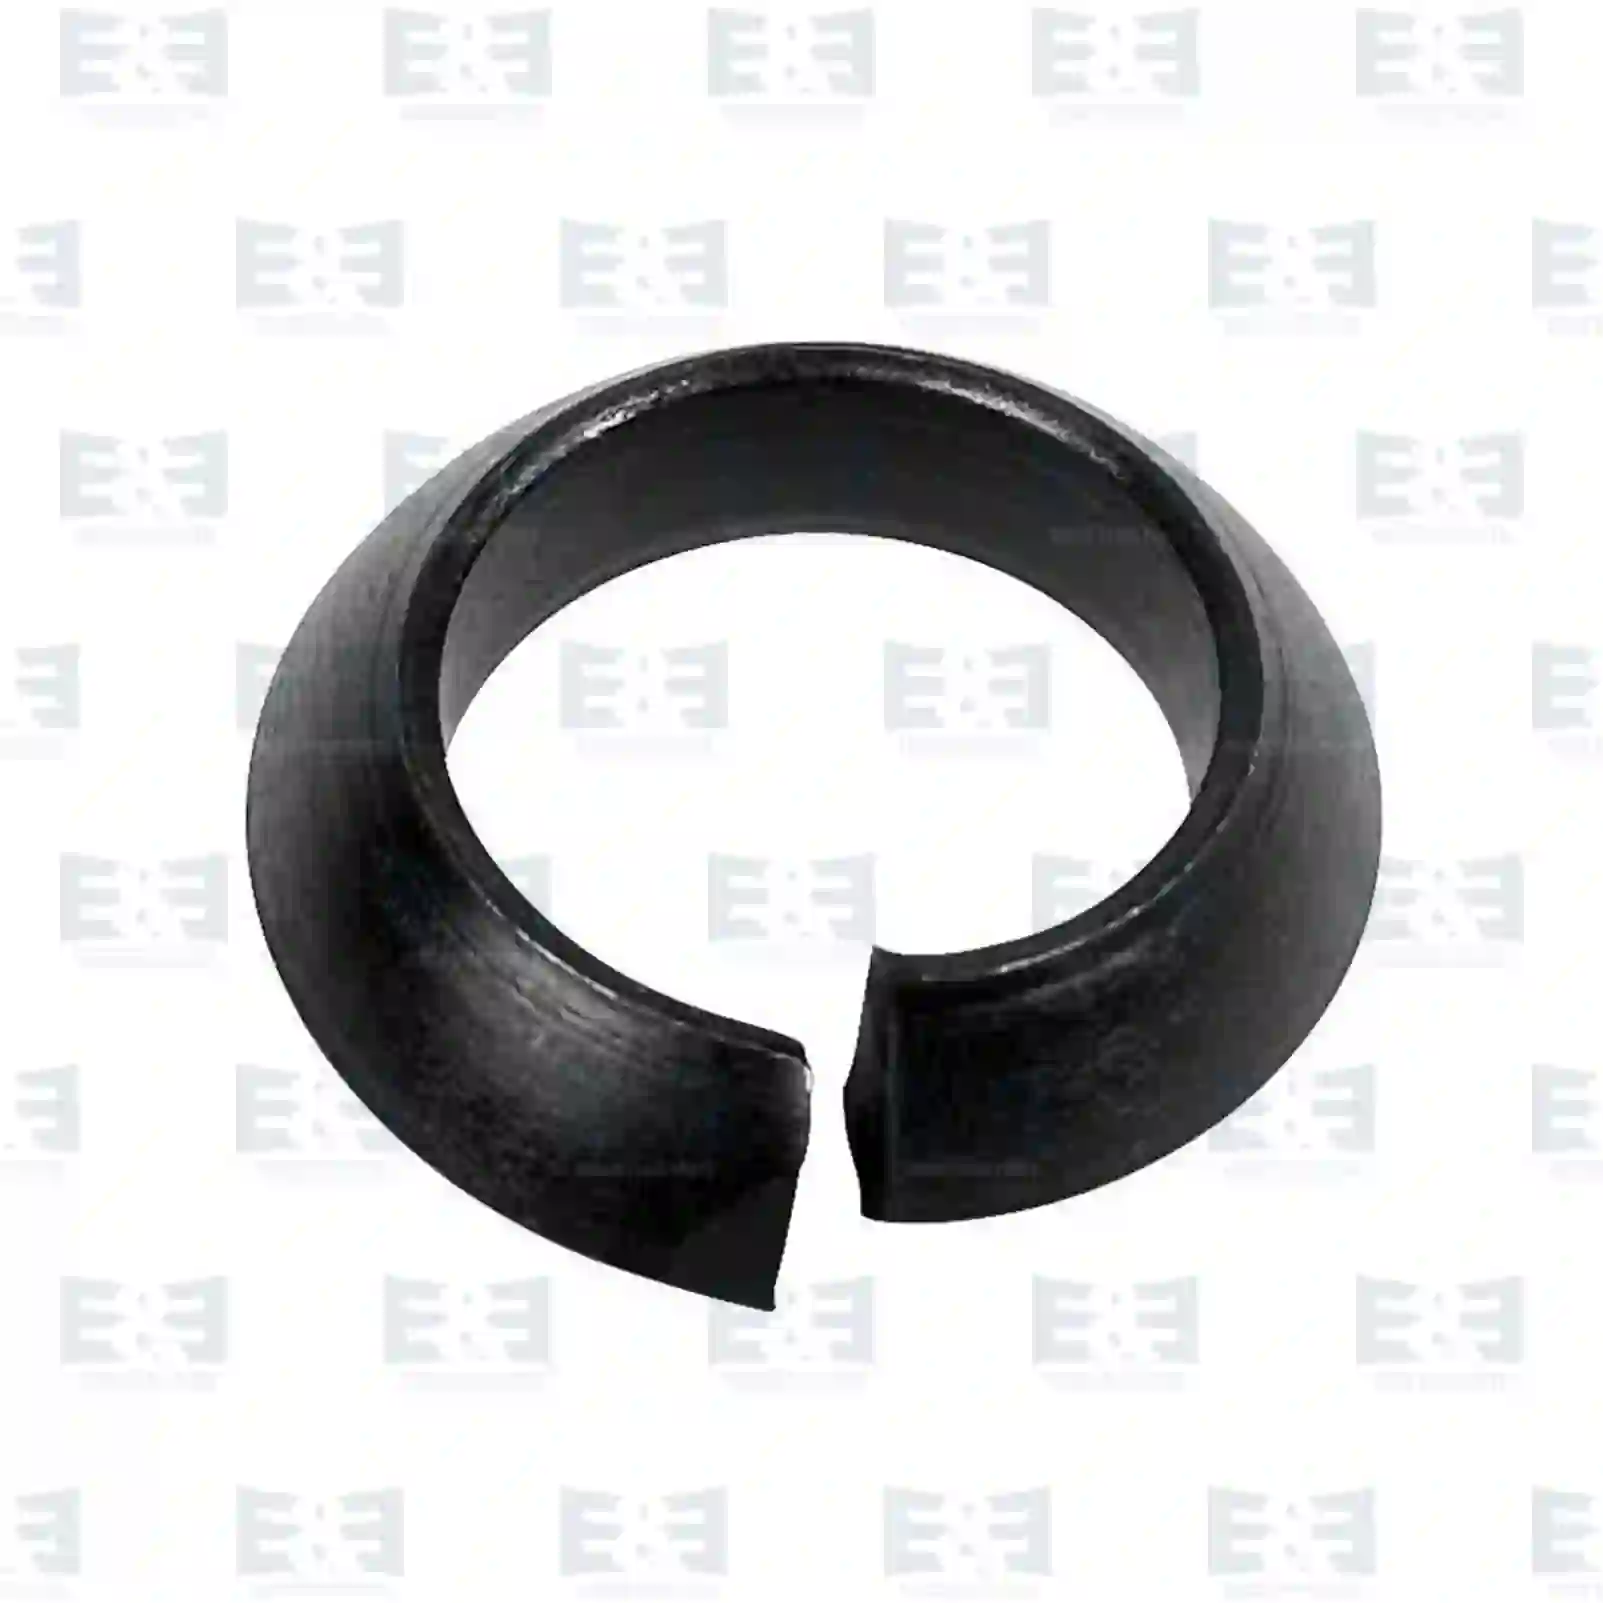 Wheel Bolt Kit Spring ring, EE No 2E2284195 ,  oem no:0256151890, 01121808, 1121808, 074361018352, ZG41764-0008 E&E Truck Spare Parts | Truck Spare Parts, Auotomotive Spare Parts